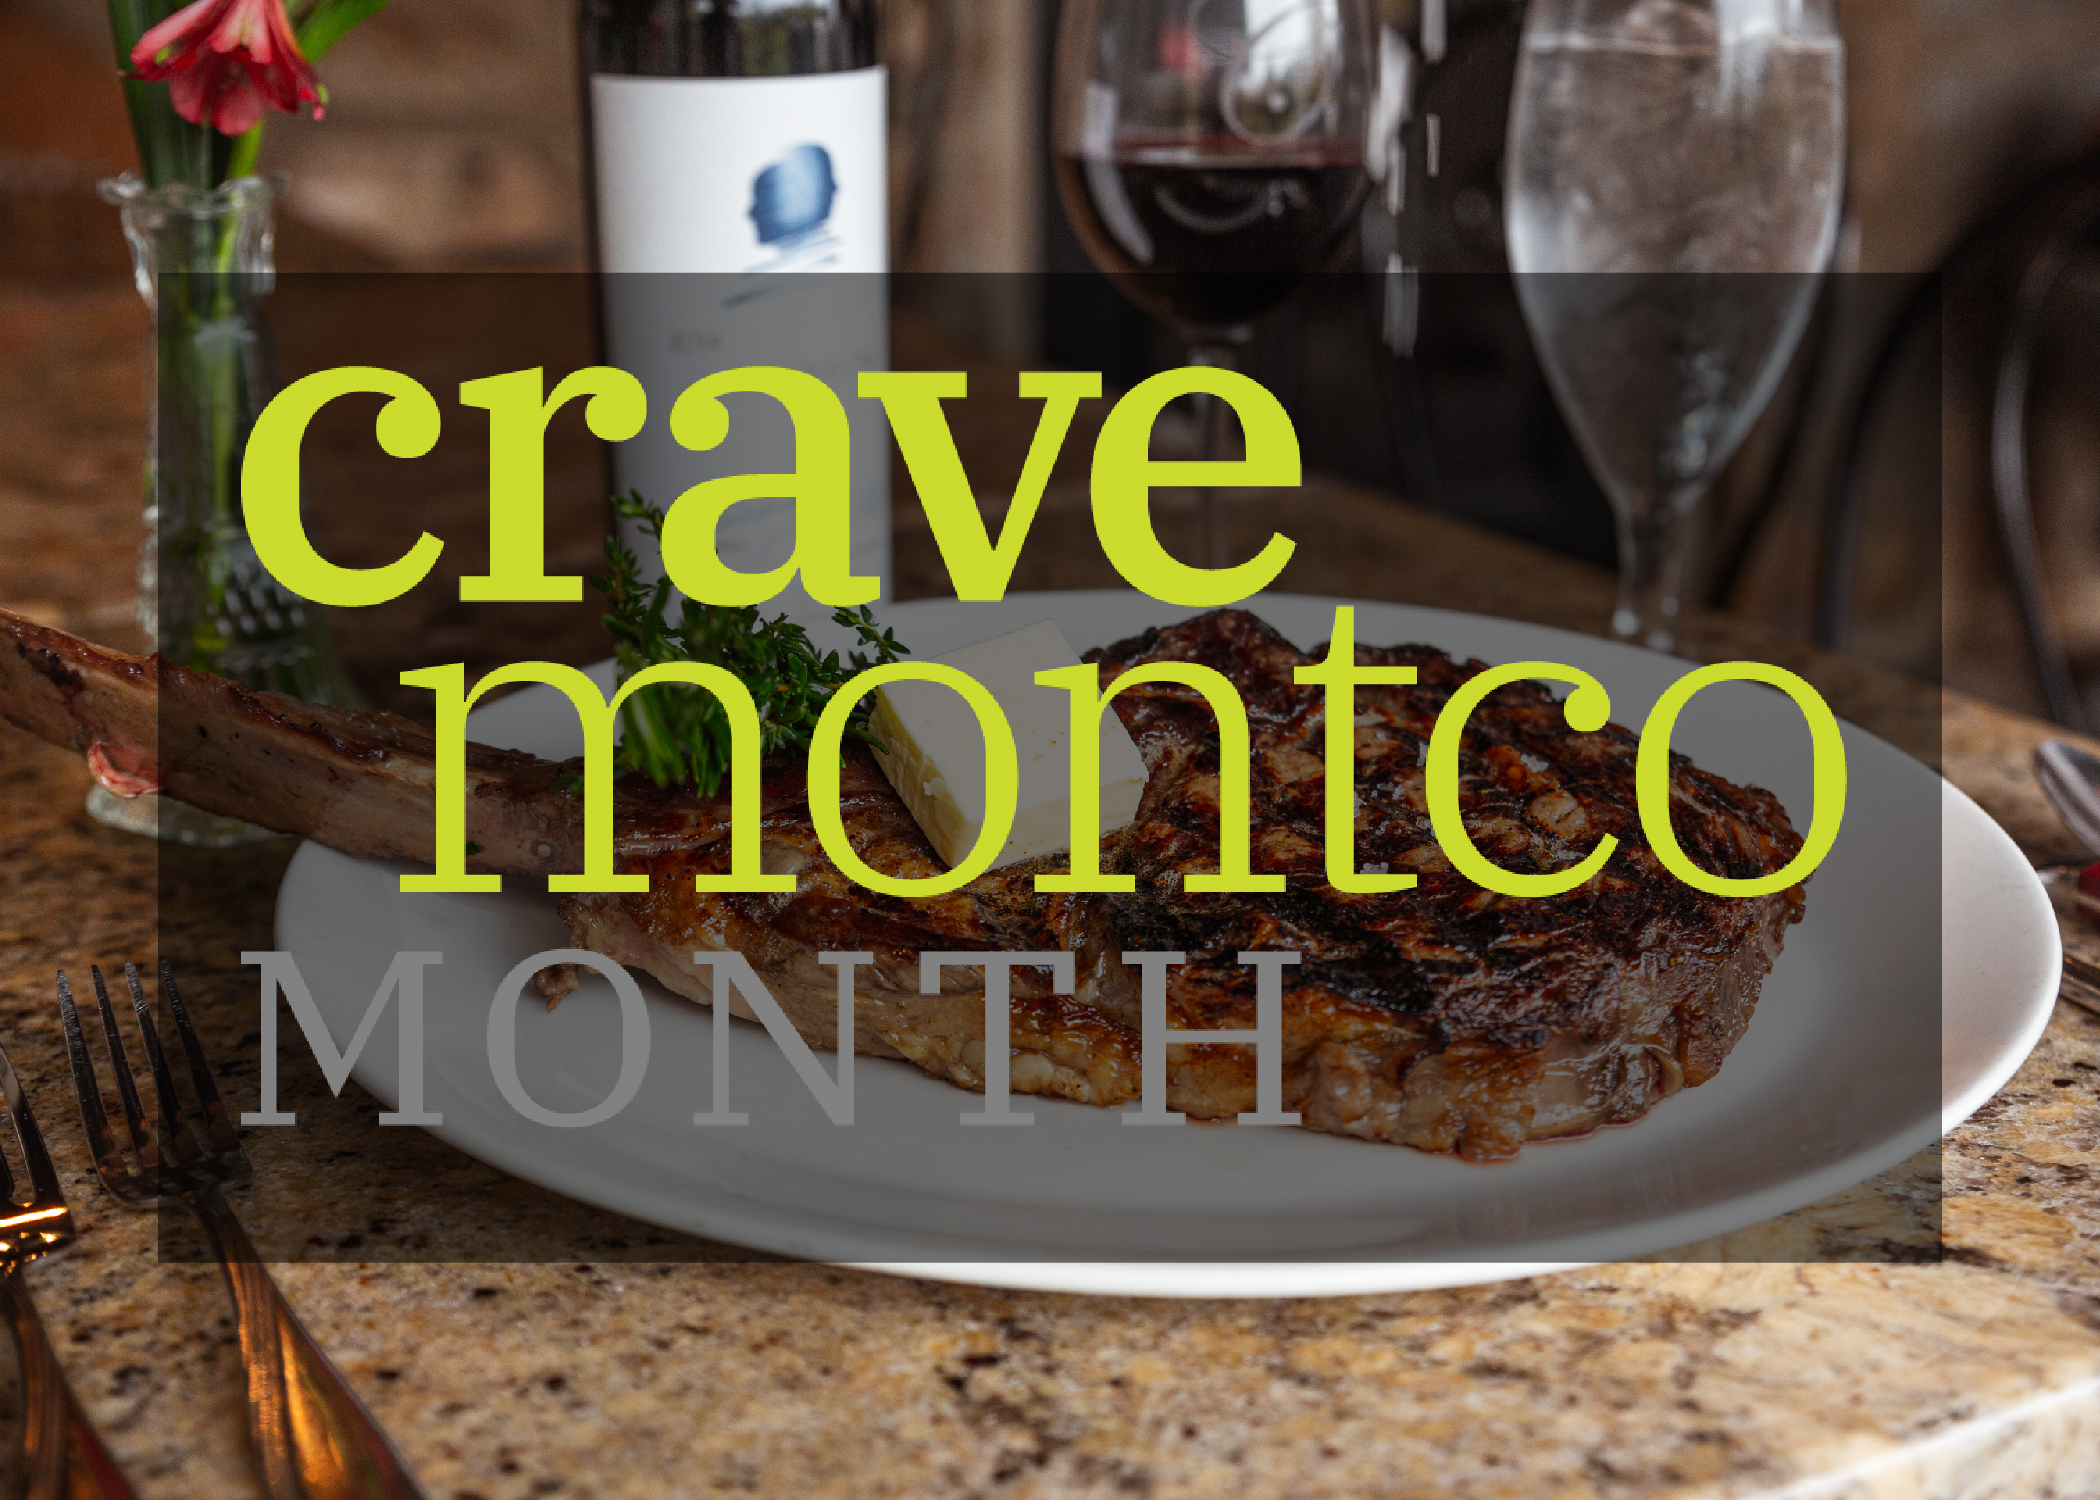 crave montco month logo over image of meat on a plate